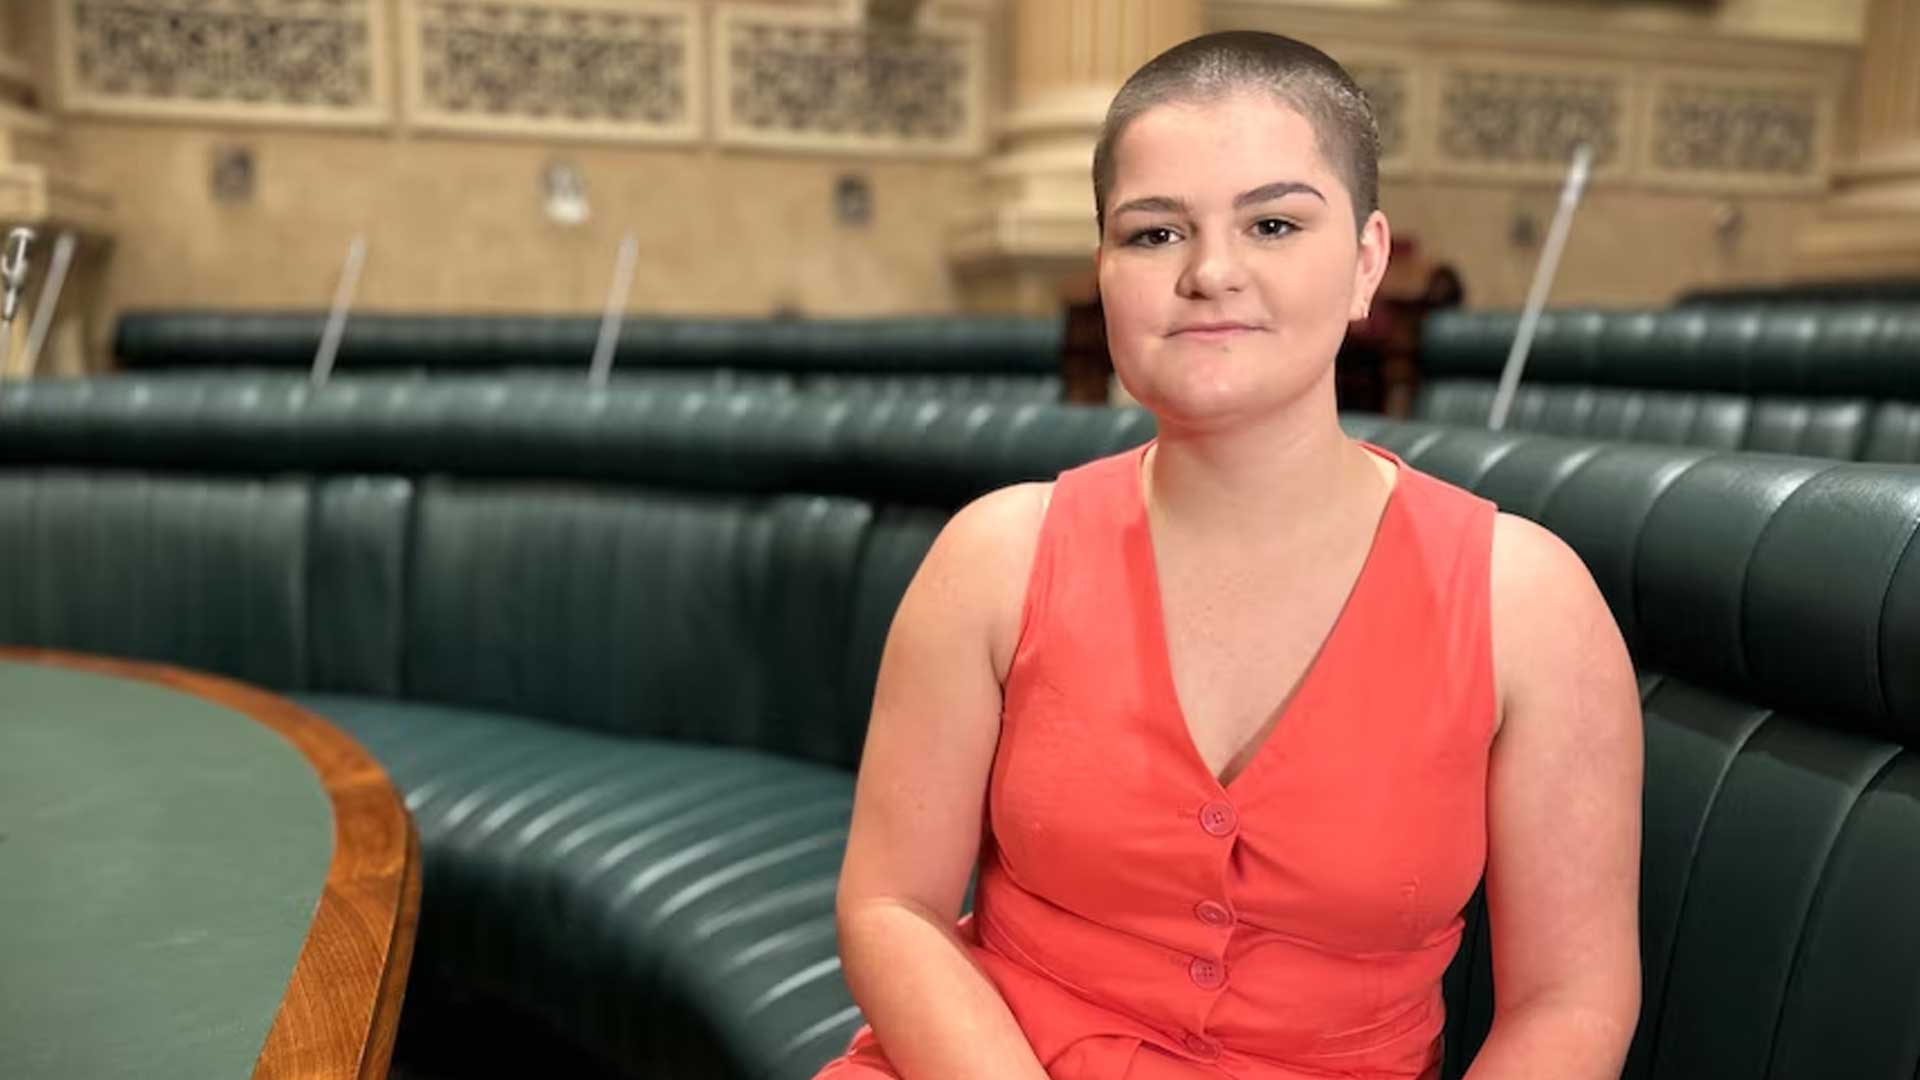 Photo of Sallee Shepherd, a young woman with close cropped hair wearing a red short sleeved jumpsuit. she is sitting in a parliamentary chamber on curved green bench seating.